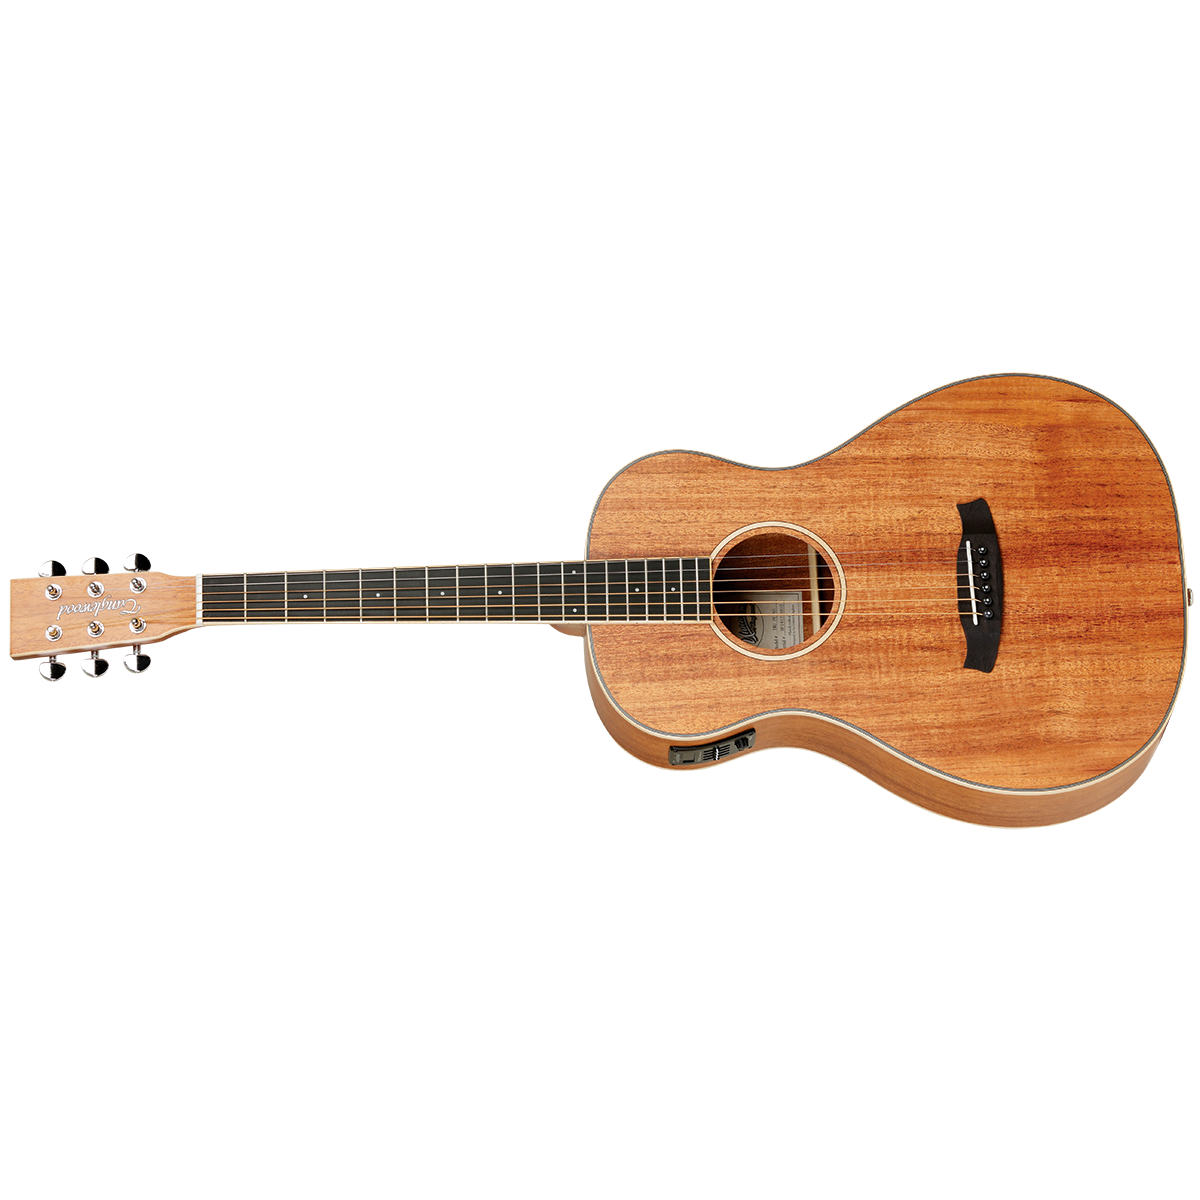 Tanglewood Union Parlor Acoustic Guitar